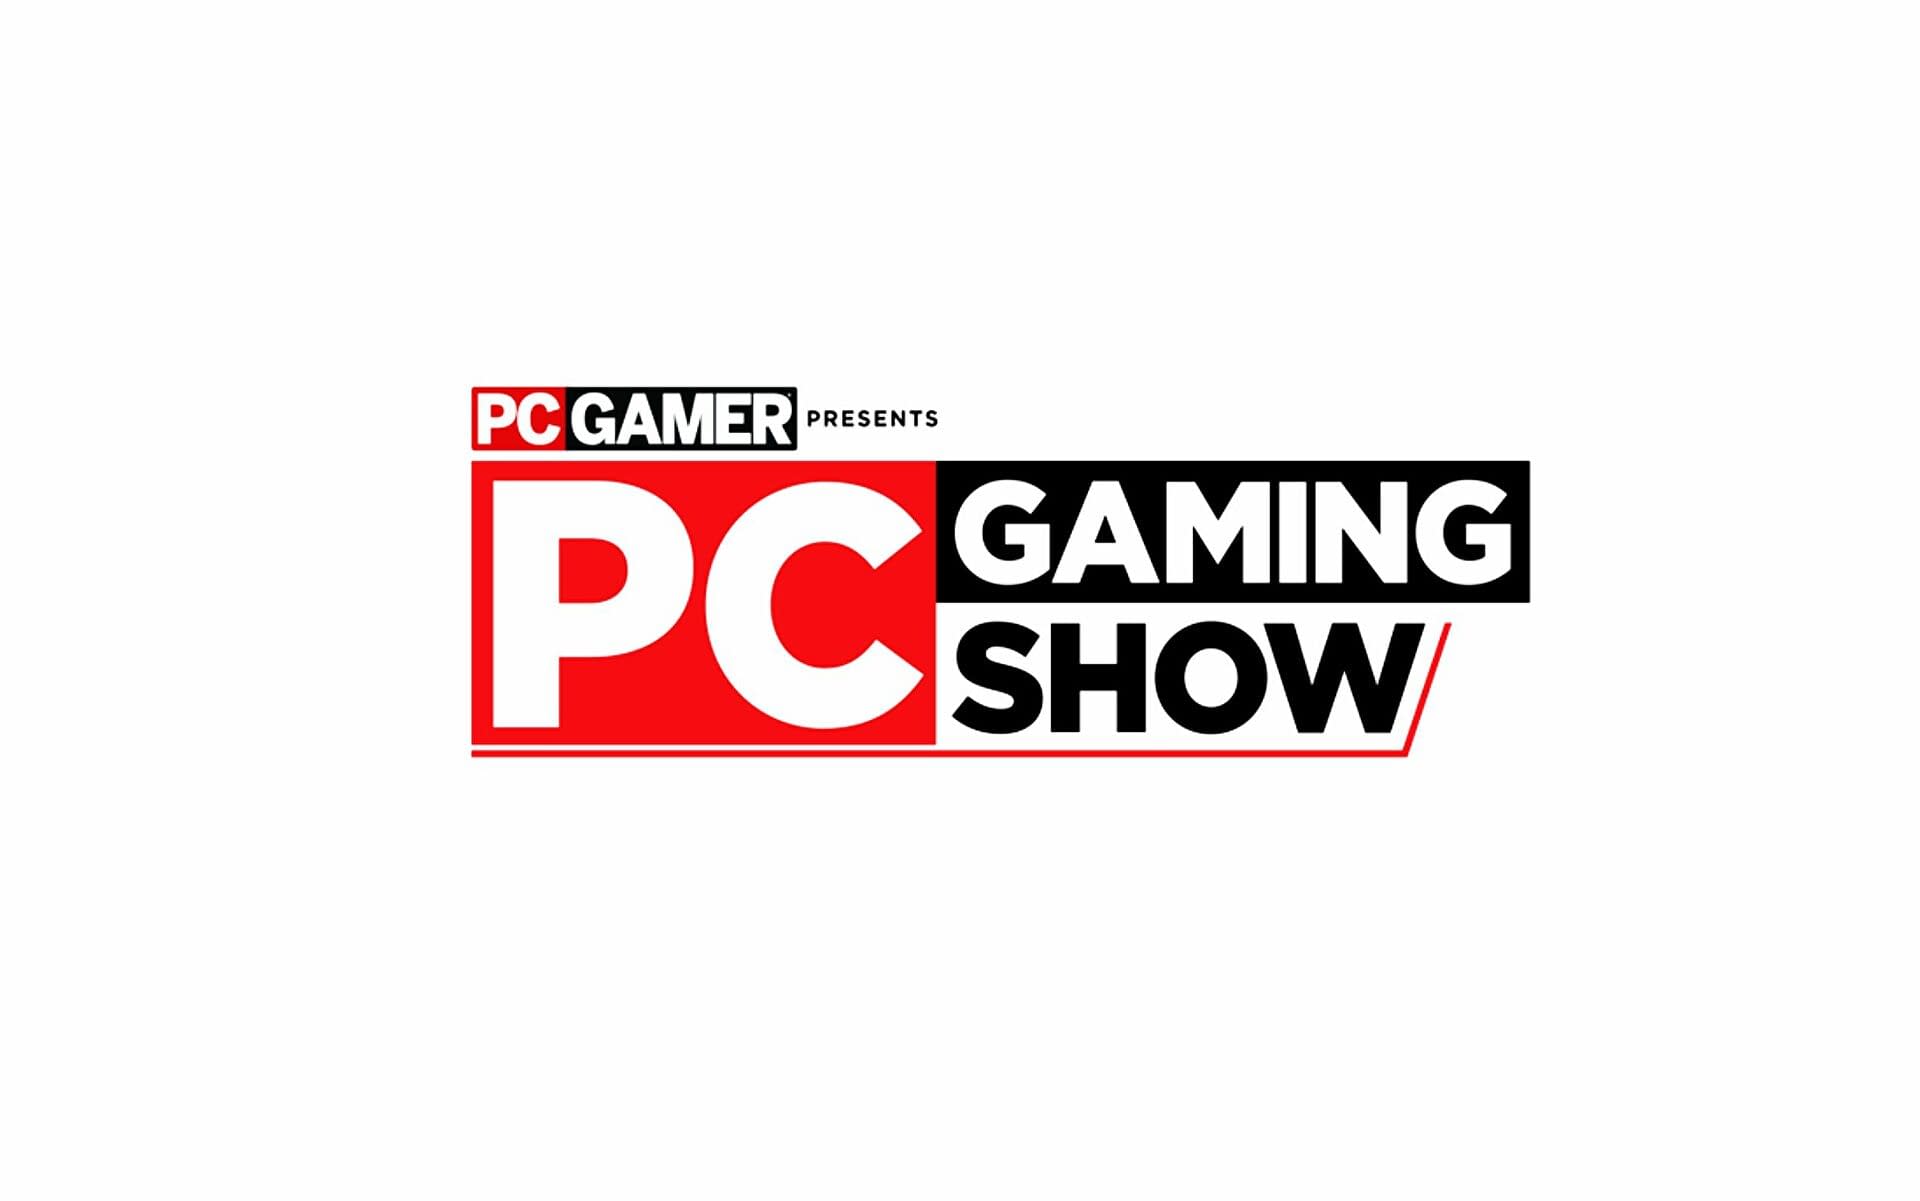 servitrice Hellere hjem The PC Gaming Show 2022 Will Take Place On June 12th